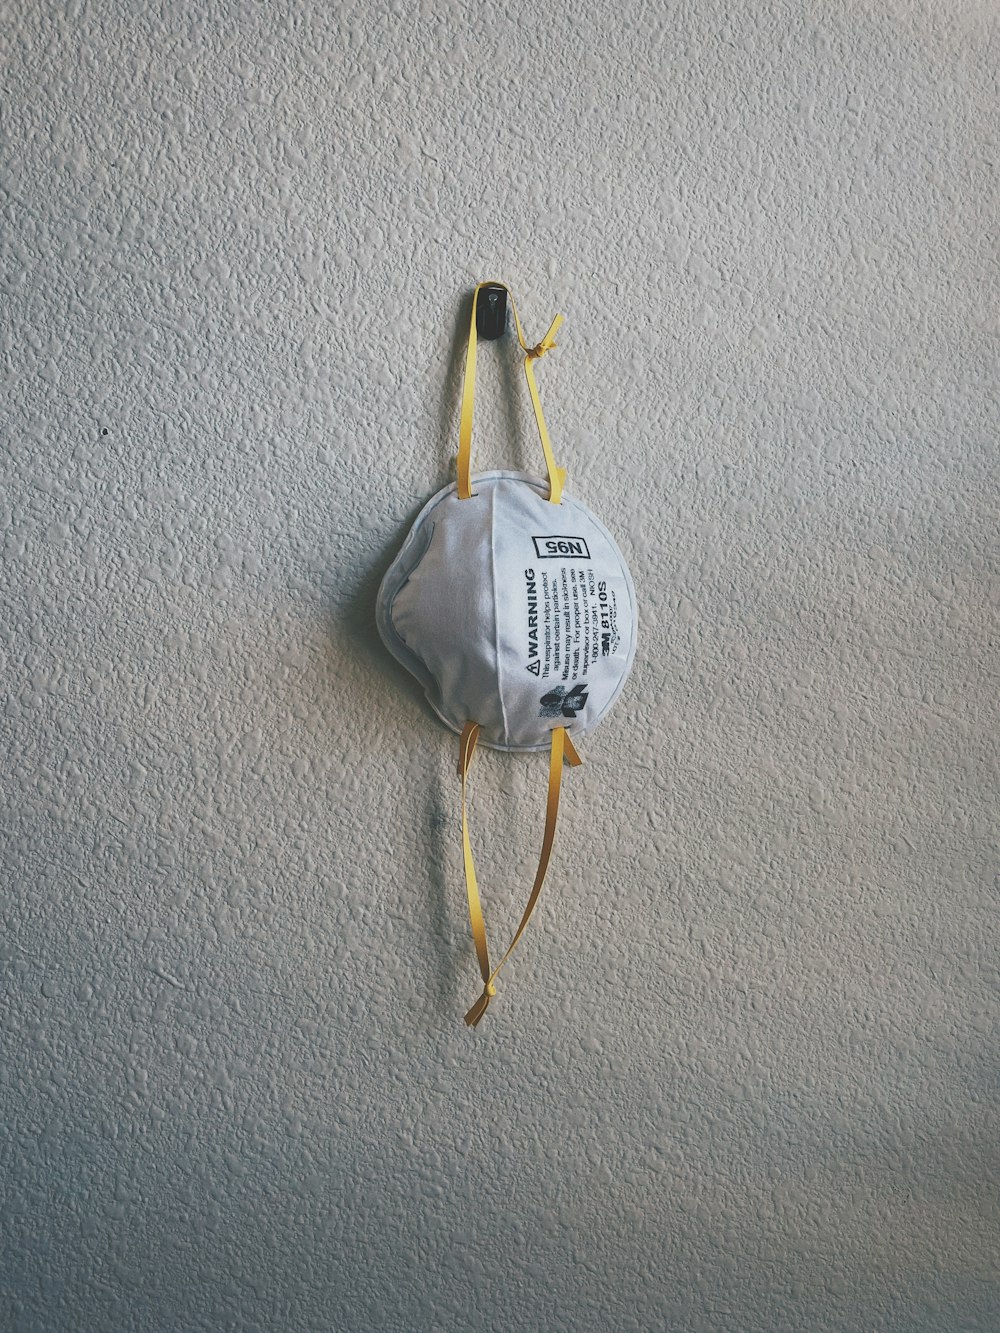 a face mask hanging on a wall